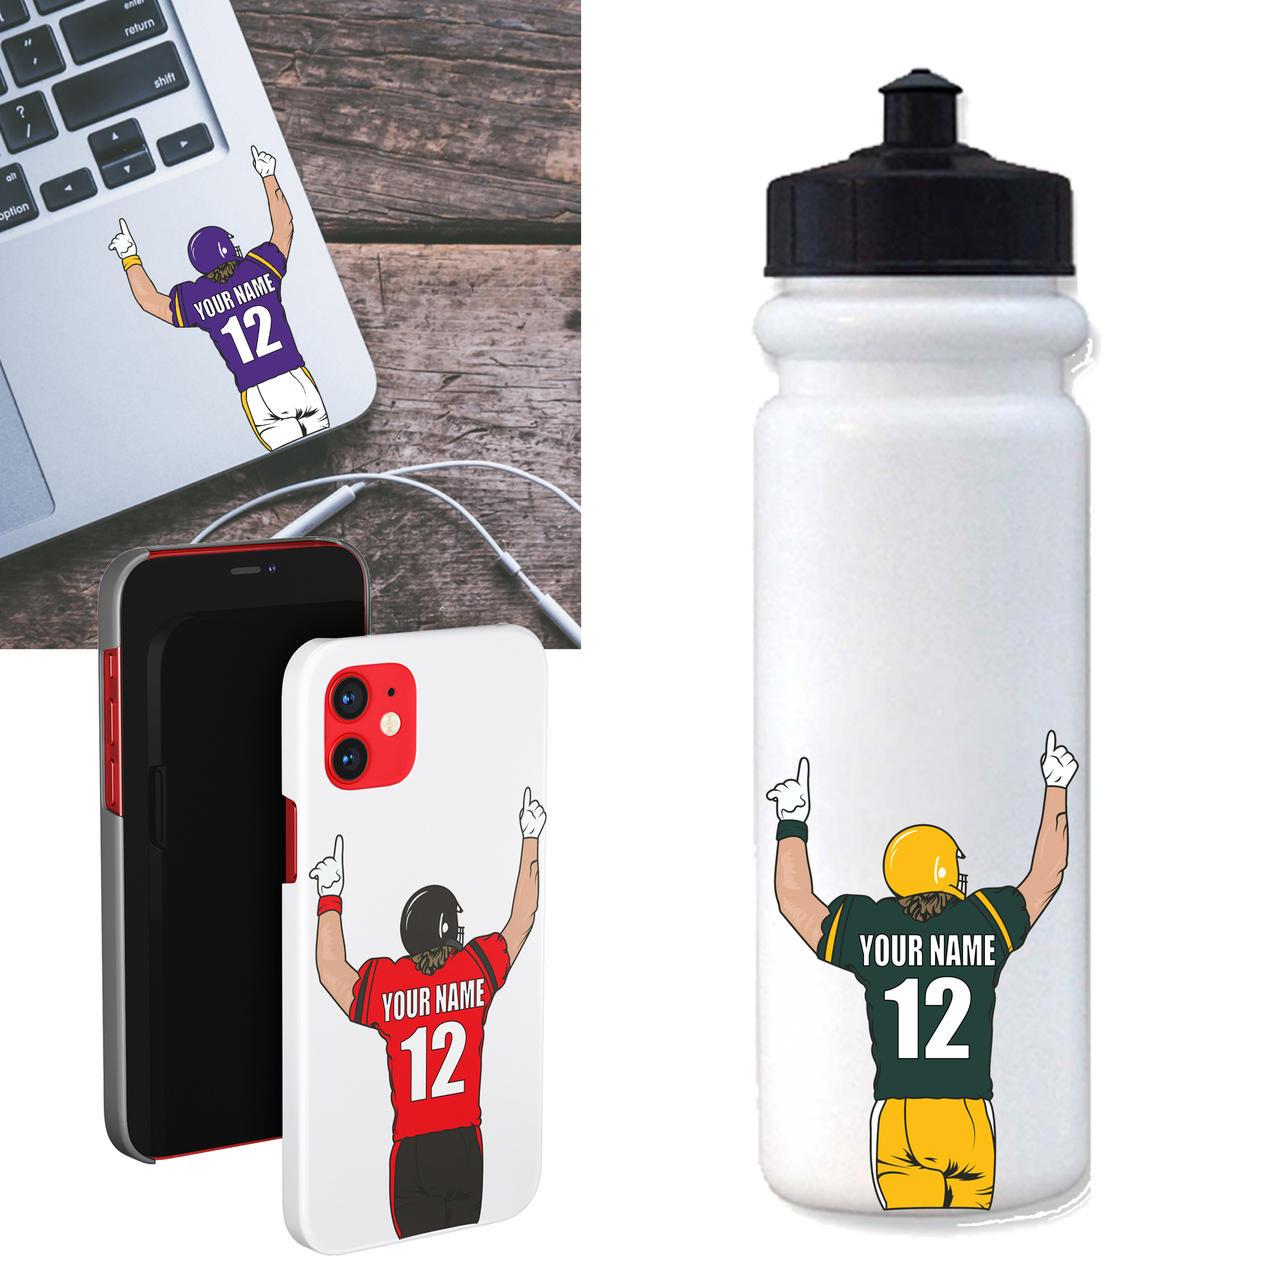 Personalized Football Water Bottle Stickers Questions & Answers